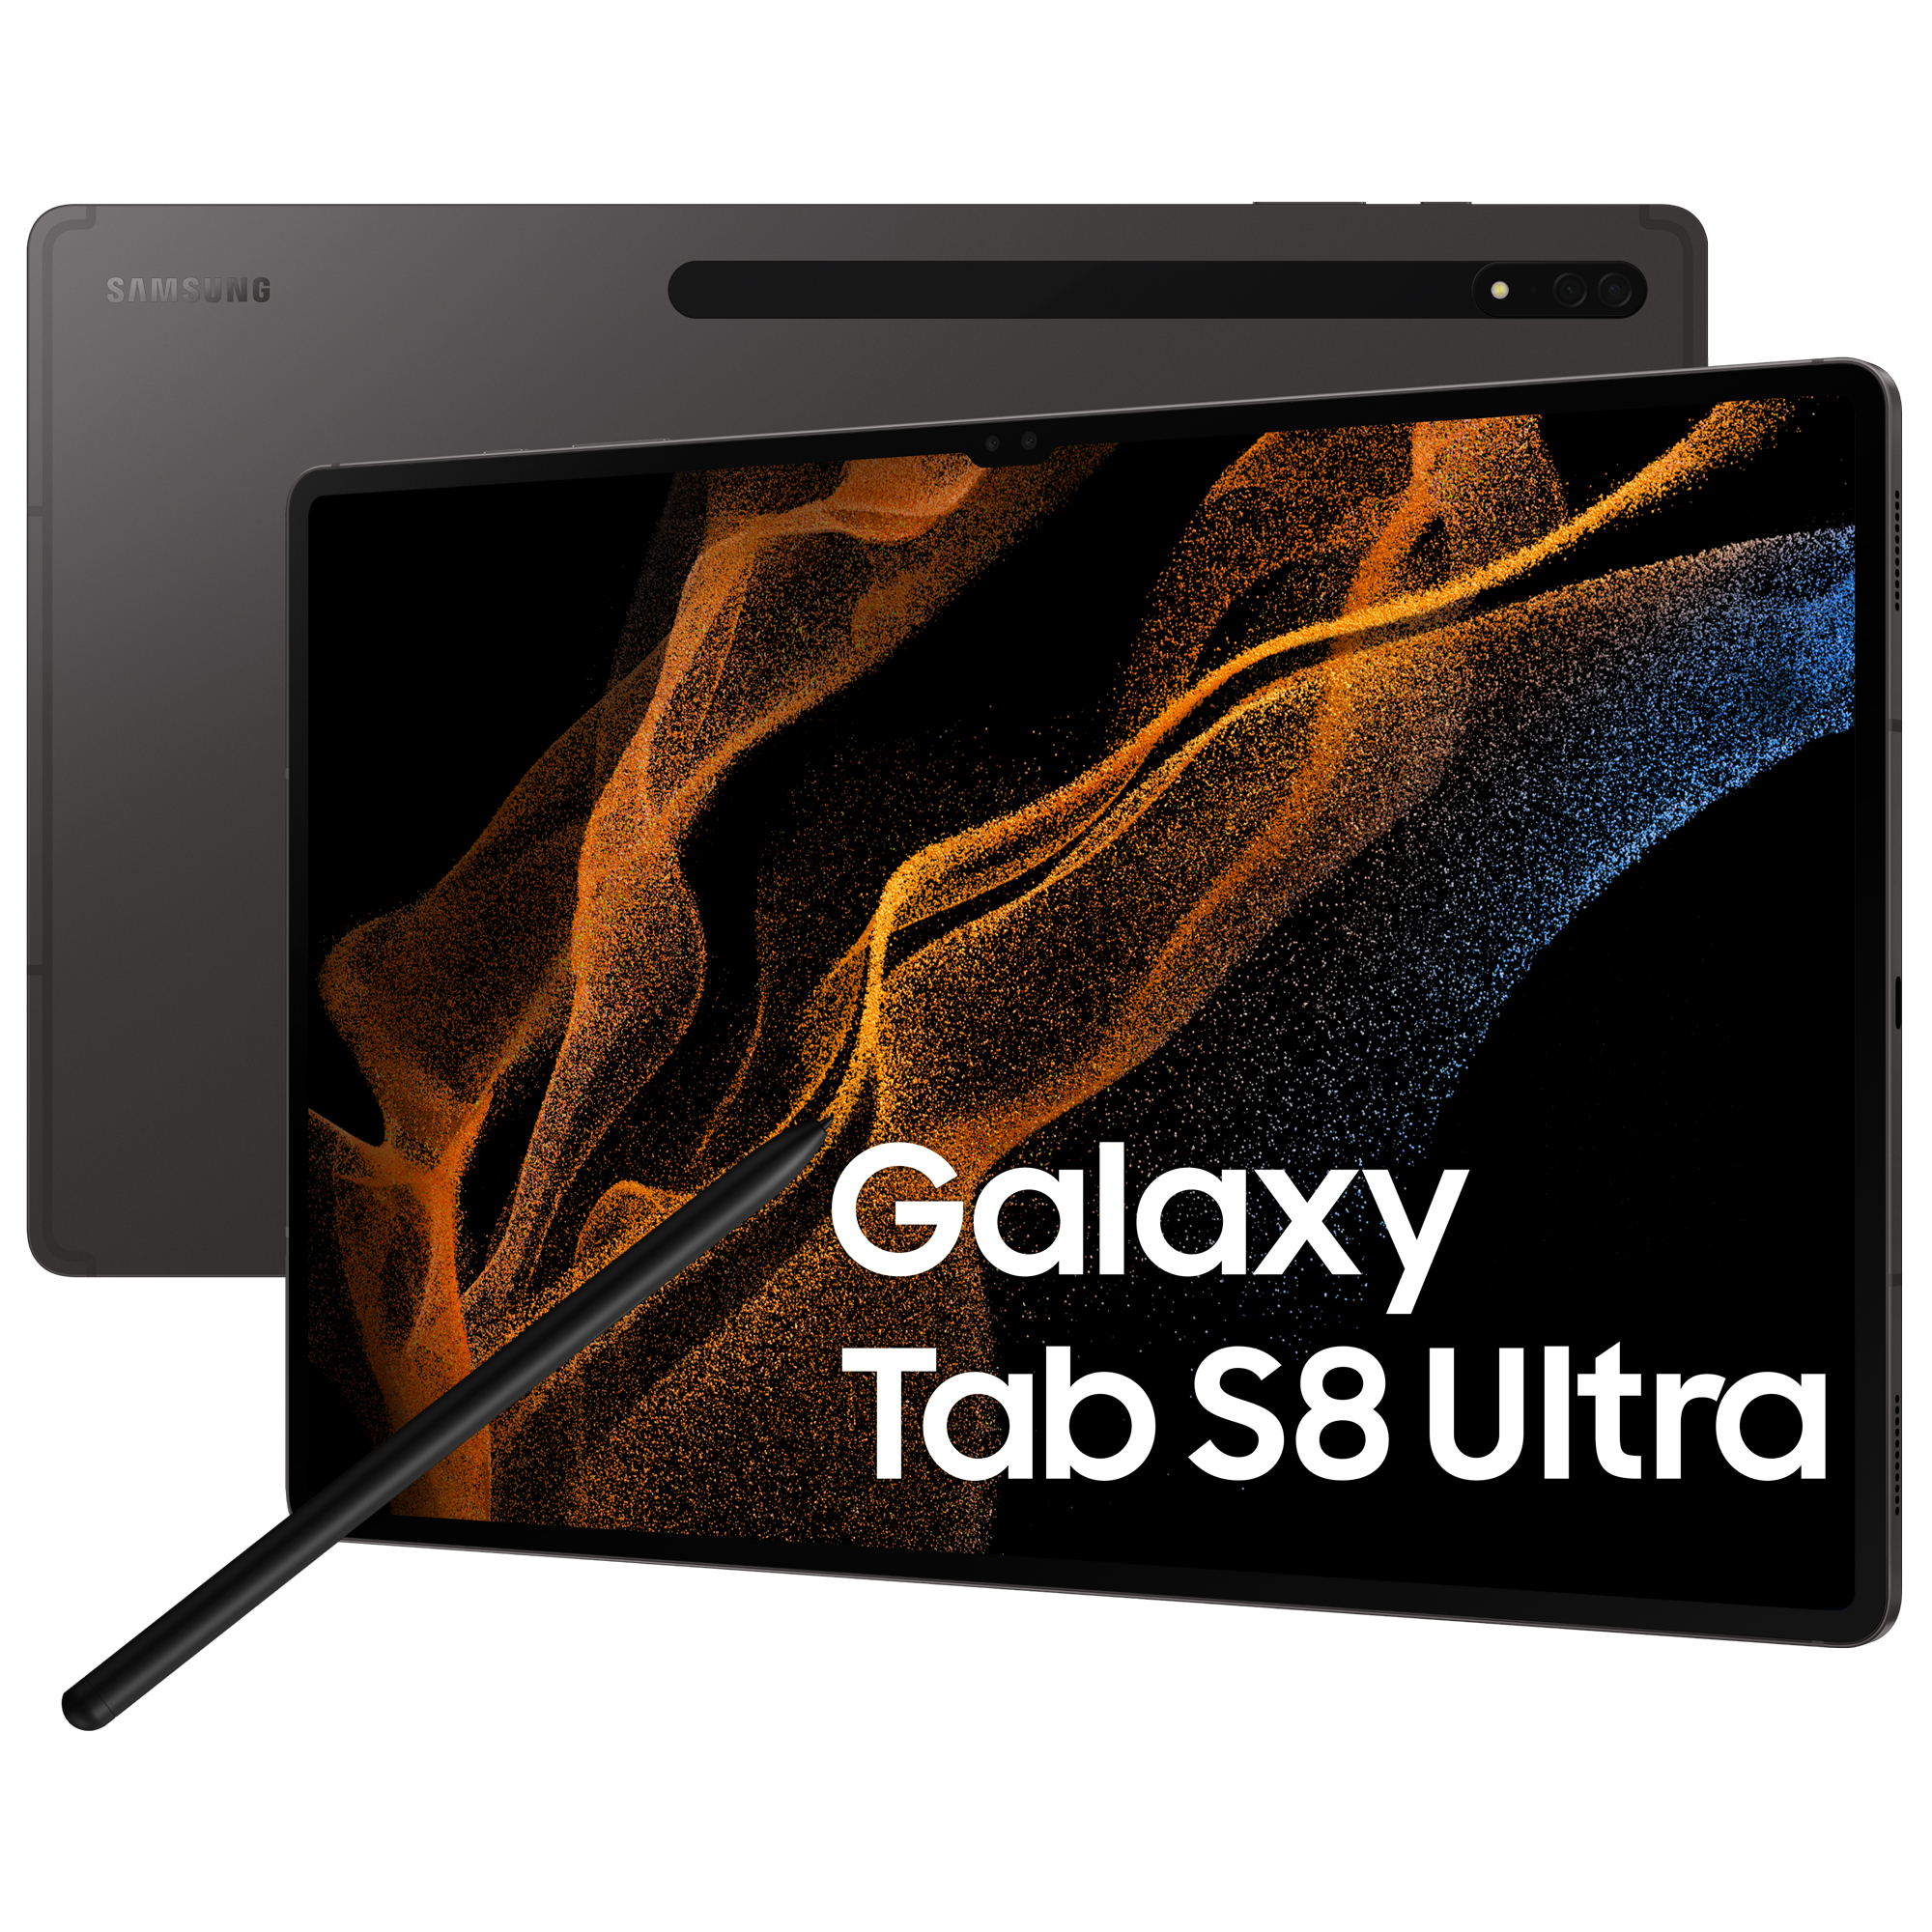 Image of Samsung Galaxy Tab S8 Ultra Tablet Android 14.6 Pollici Wi-Fi RAM 12 GB 256 GB Tablet Android 12 Graphite [Versione italiana] 2022